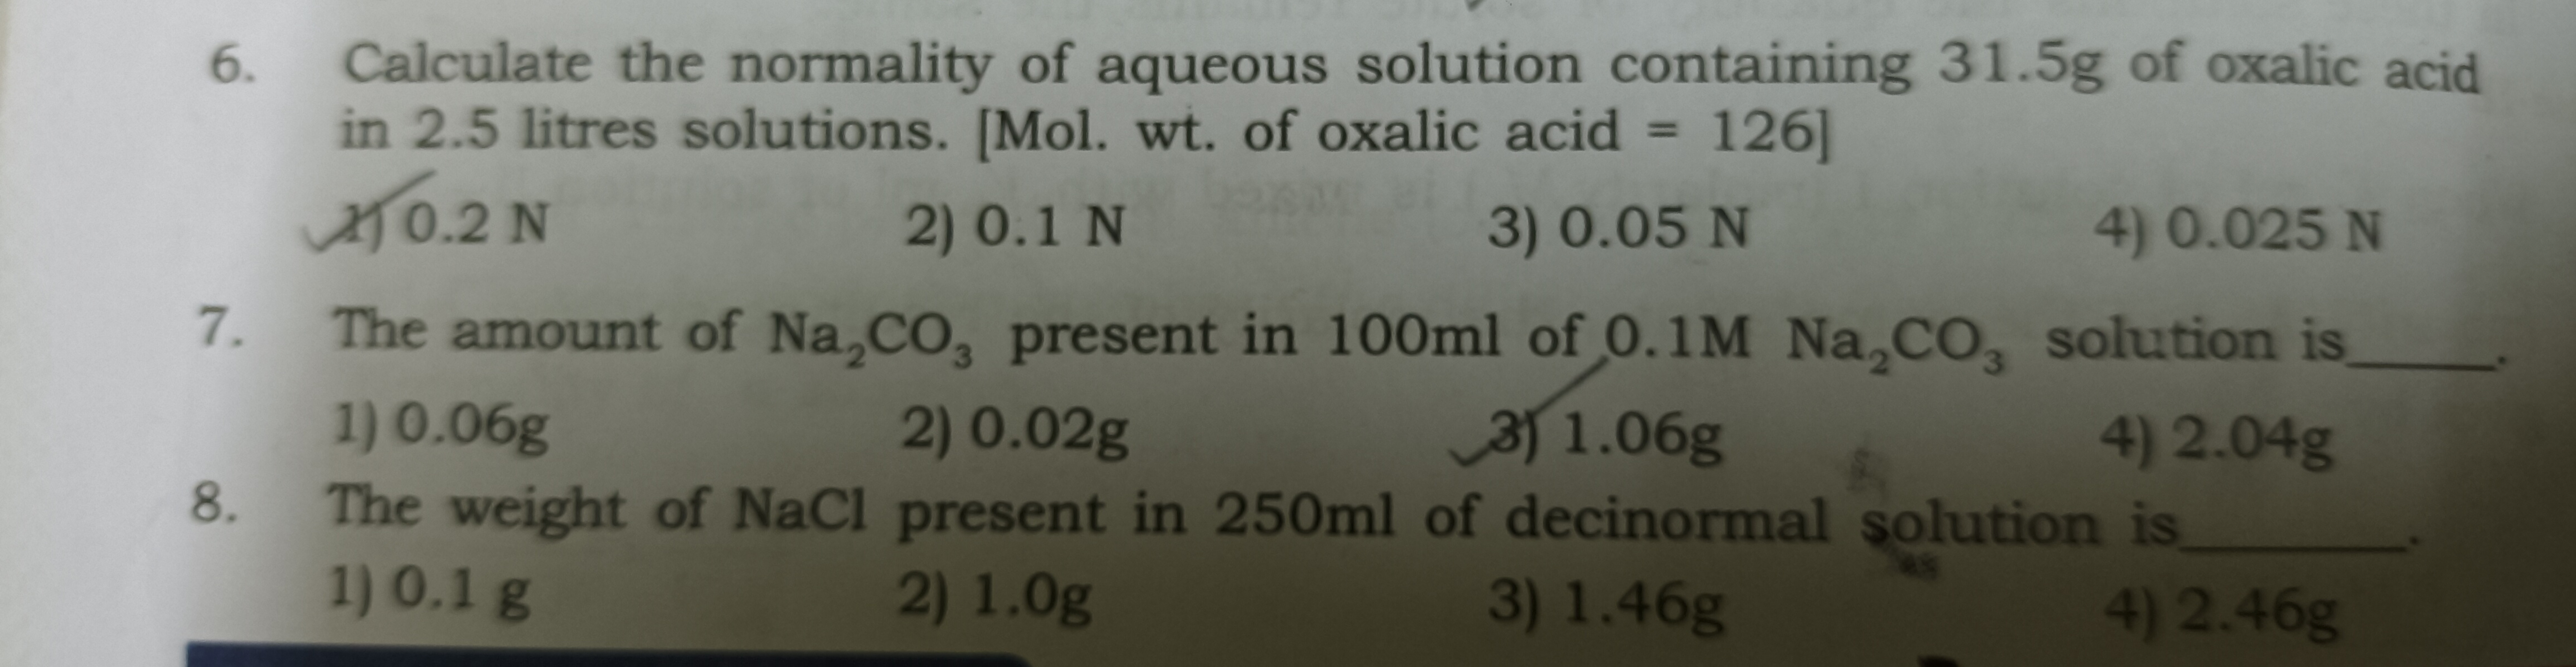 Calculate the normality of aqueous solution containing 31.5 g of oxali